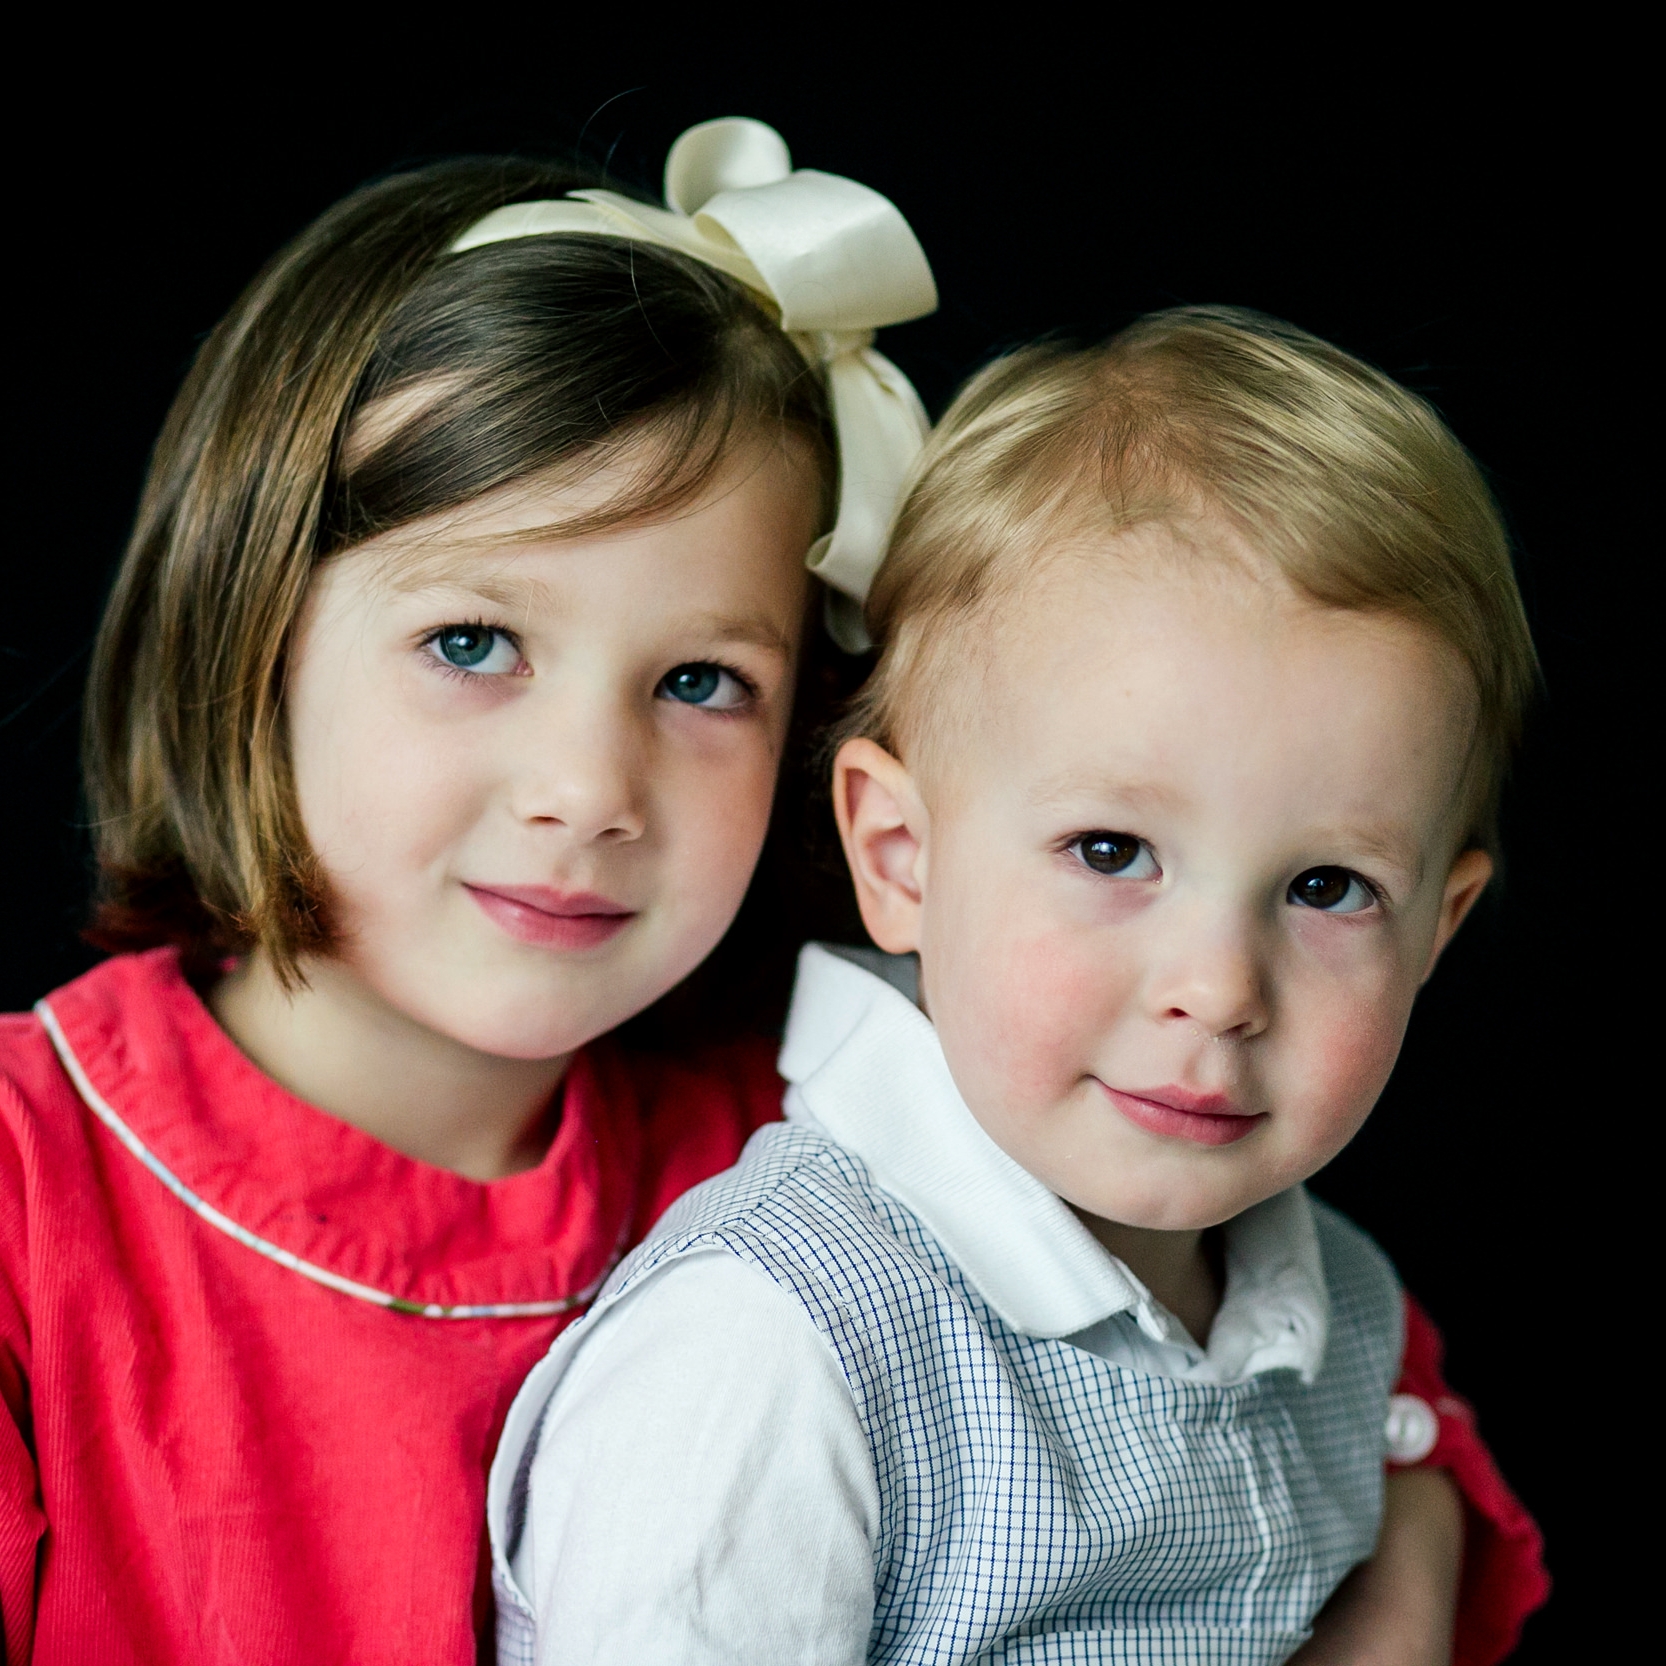 We just received the school portraits for this year and I am stunned. These are the best photographs that ANY photographer has ever taken of my children. The photos are just perfect!